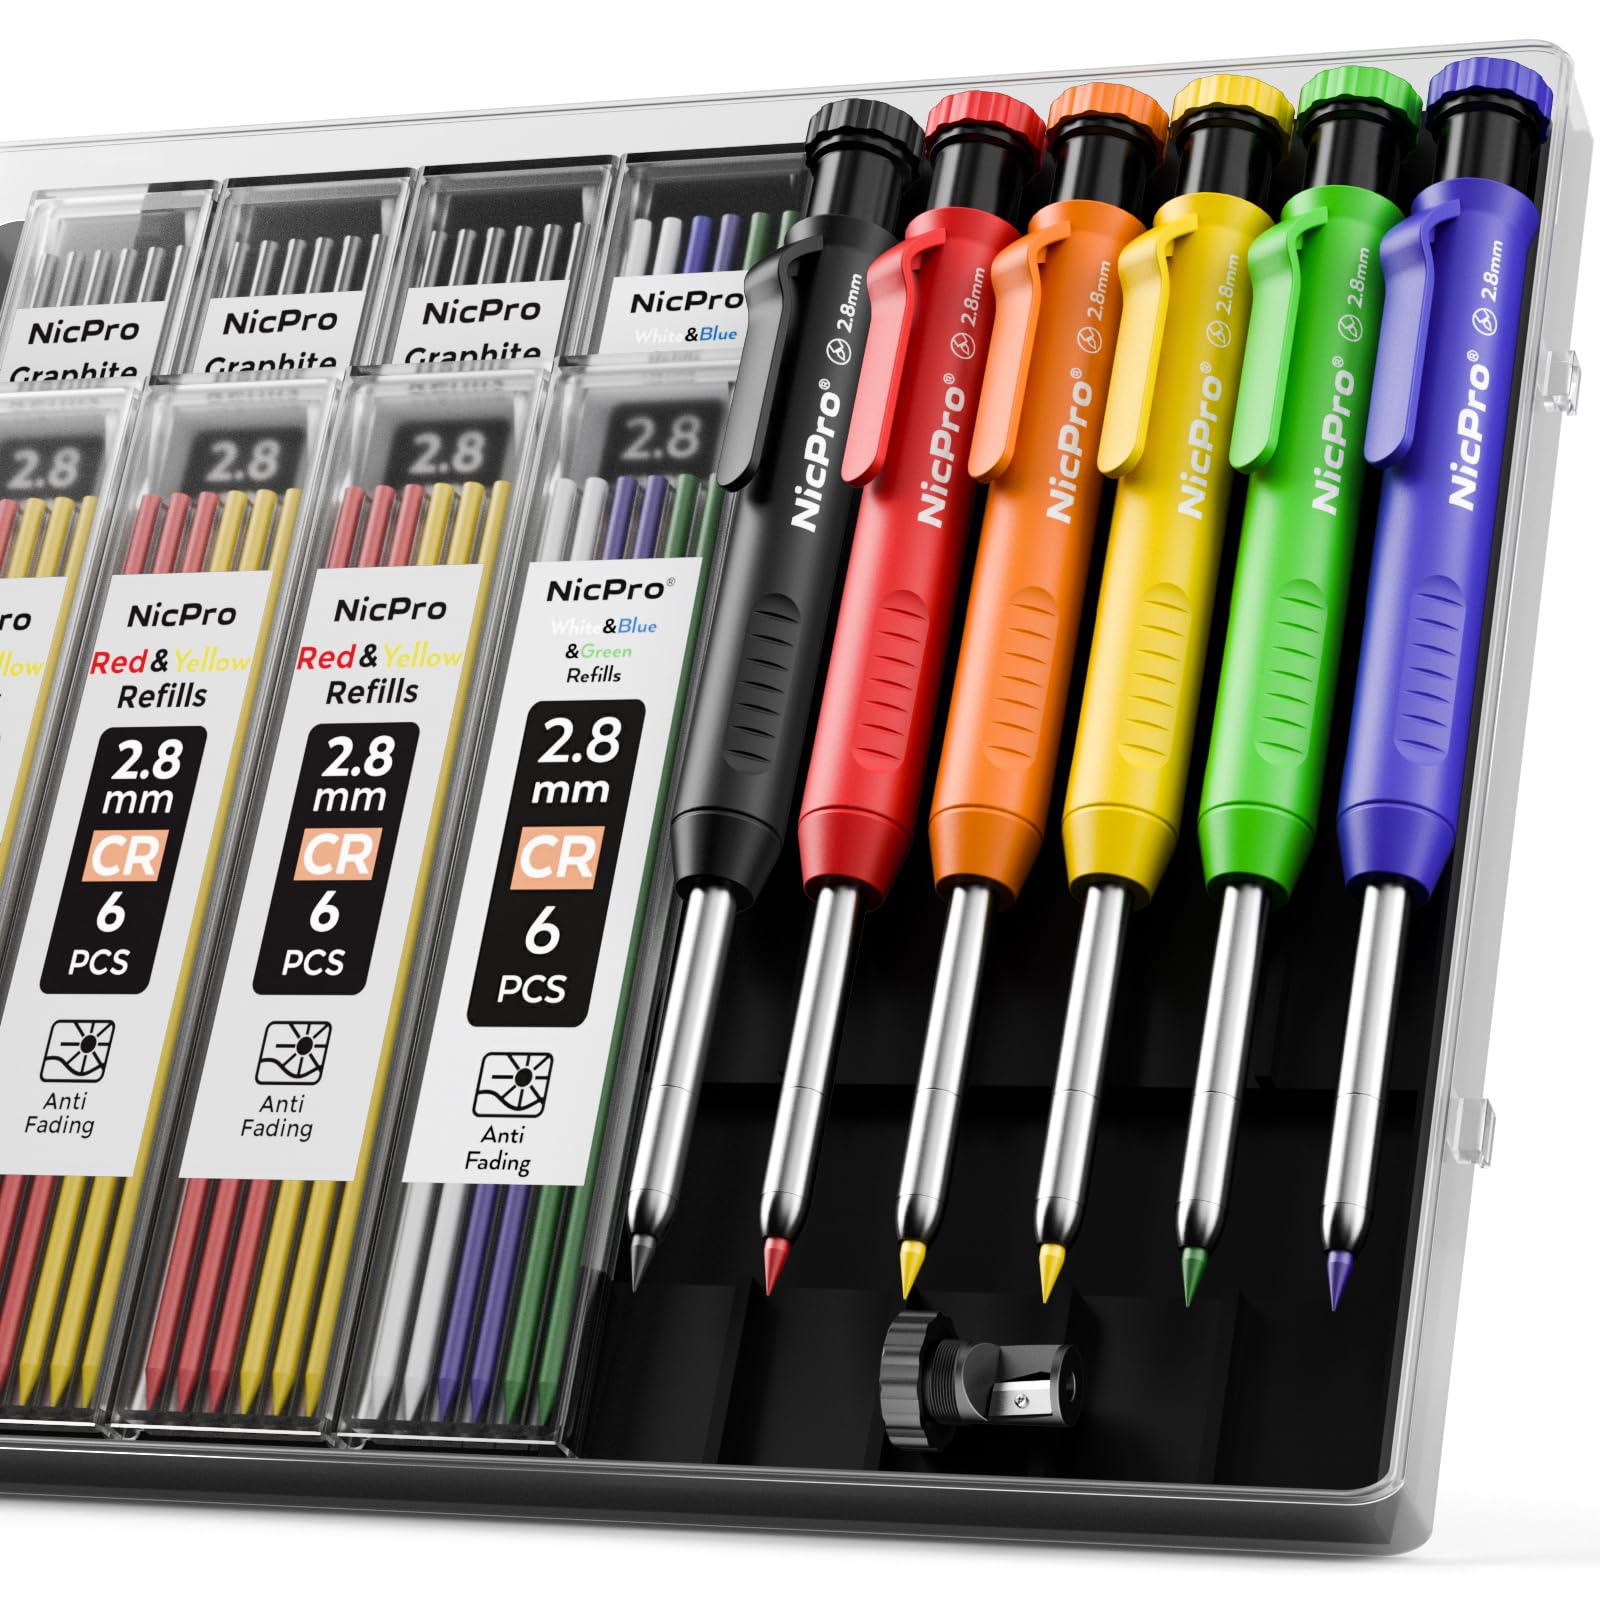 Nicpro 6 Pack Carpenter Pencil with Sharpener,Mechanical Pencils Set 54PCS Refills(Black,Red,Yellow,Blue,Green,White) Deep Hole Marker Construction Heavy Duty Woodworking -With Case(MG552)